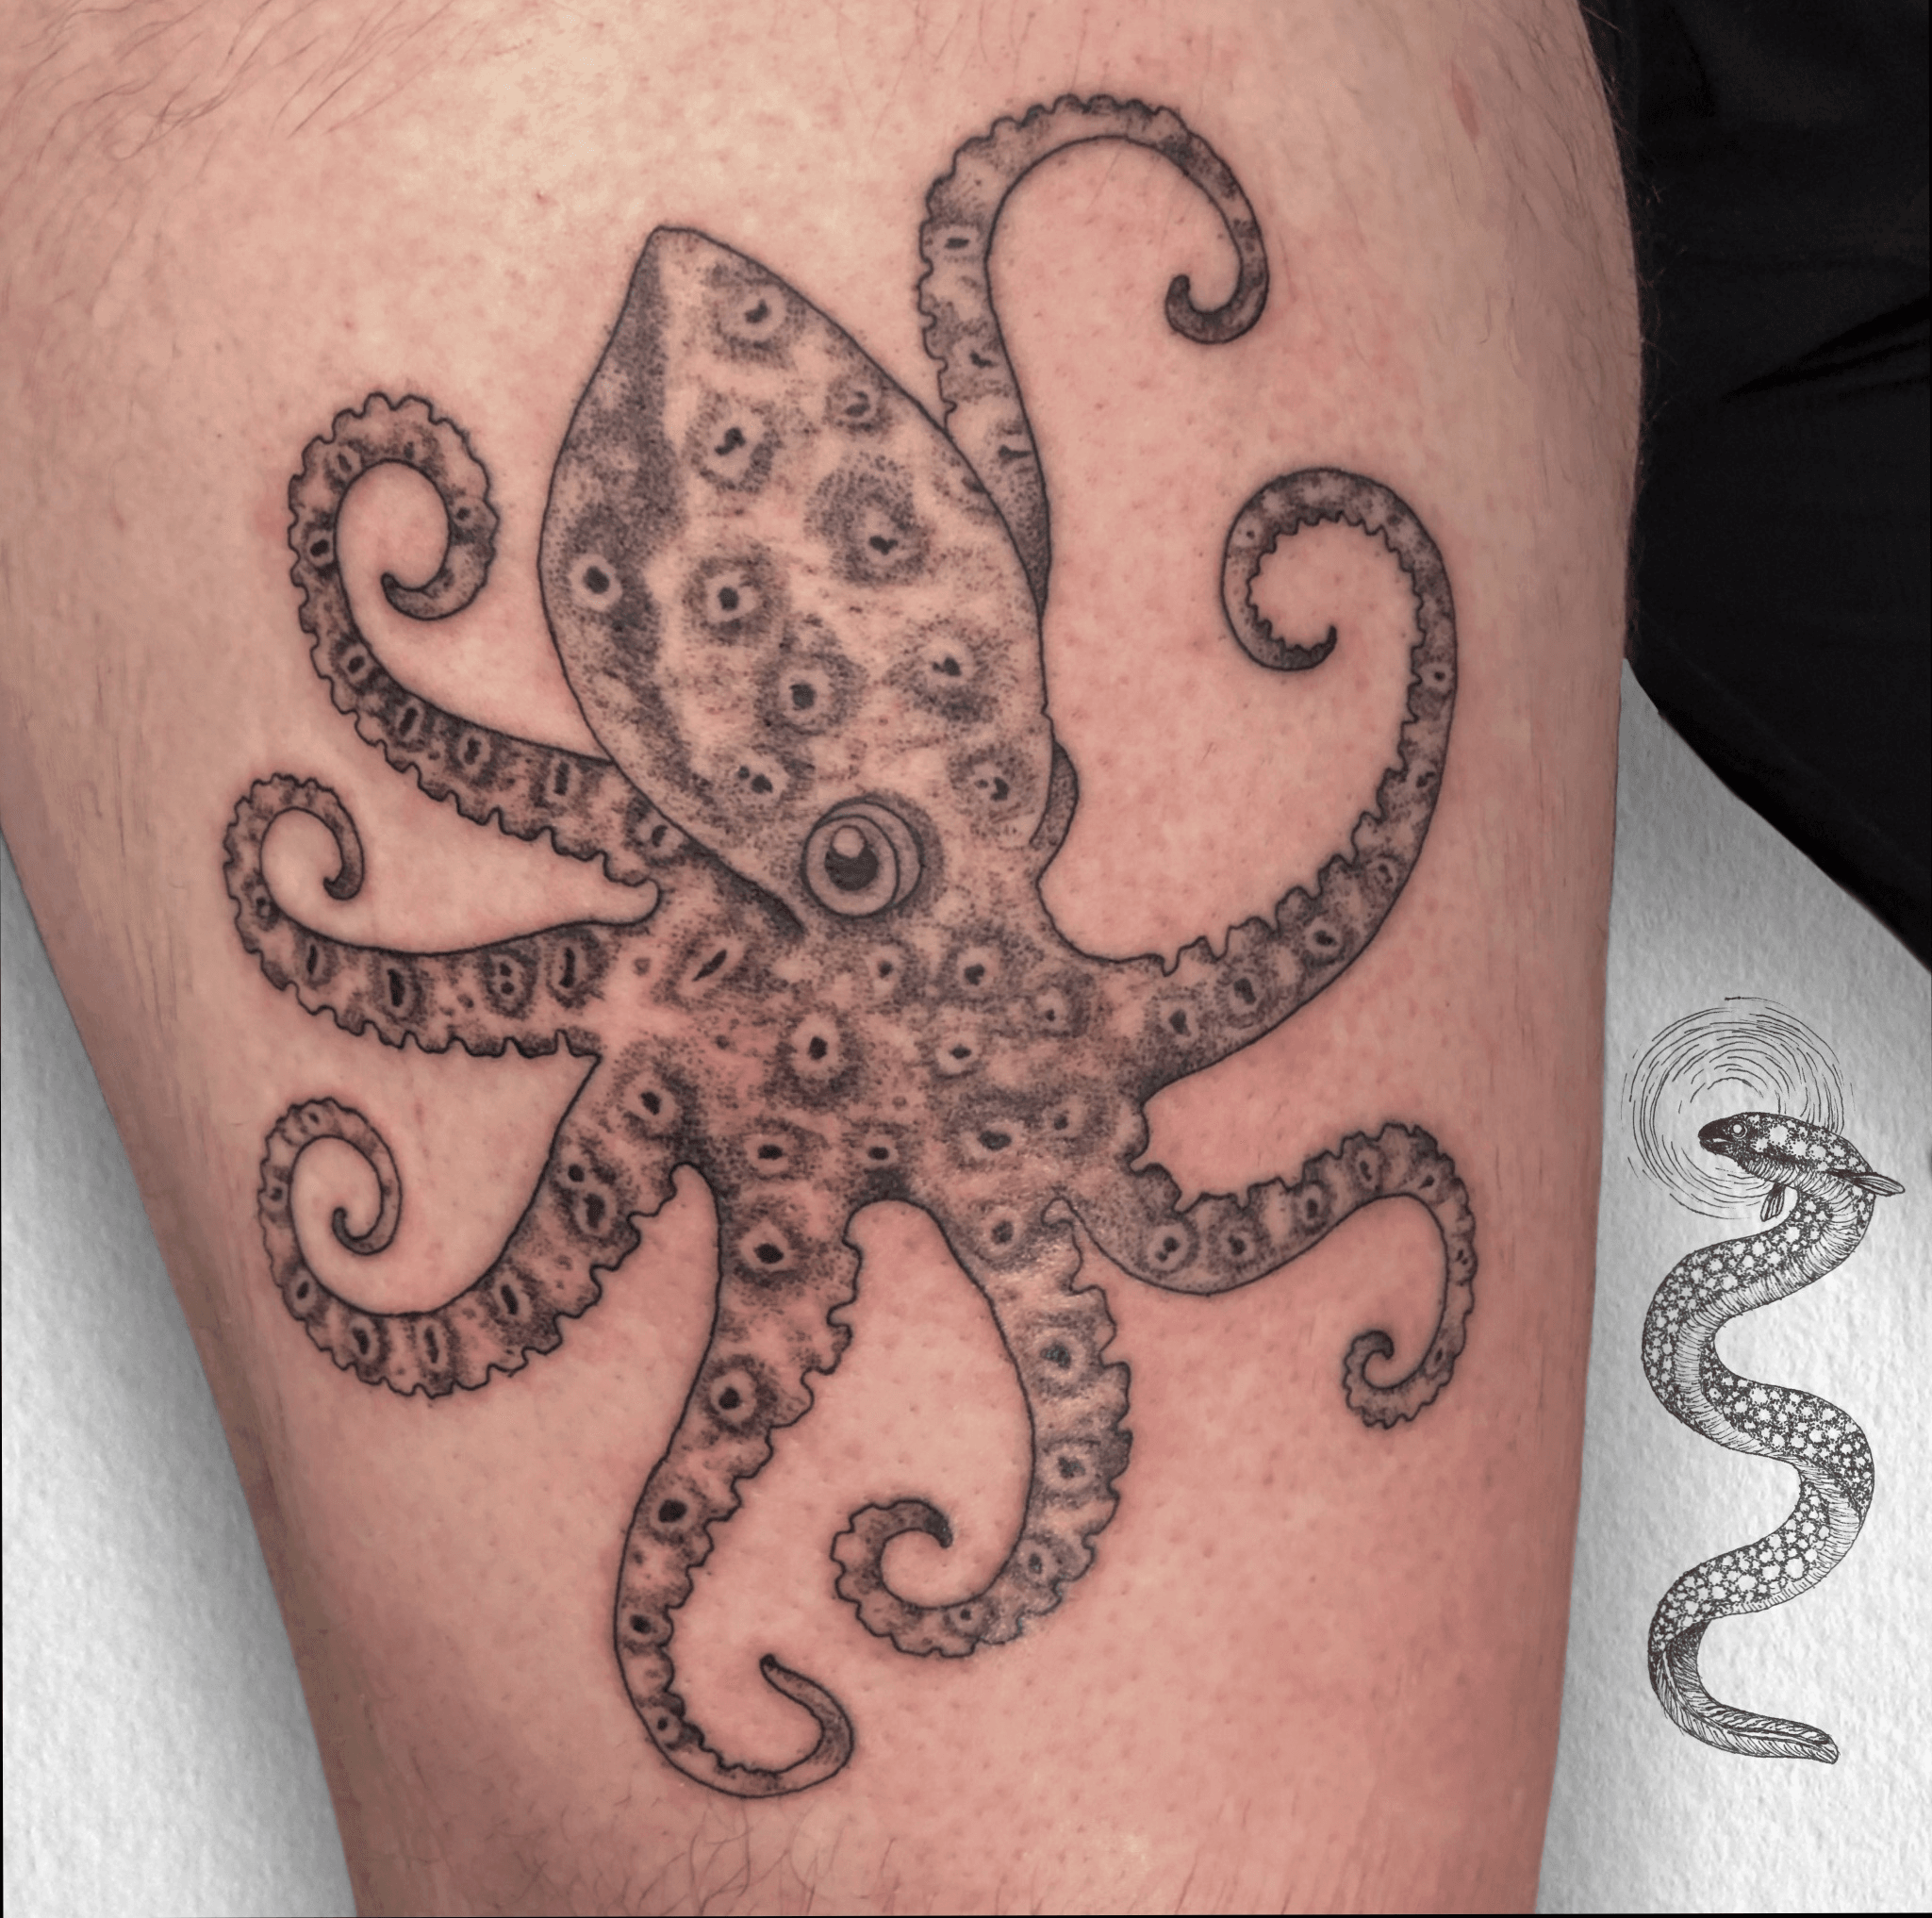 Tattoo uploaded by Doug Fortin • Blue-ringed octopus done in a stipple style. • Tattoodo